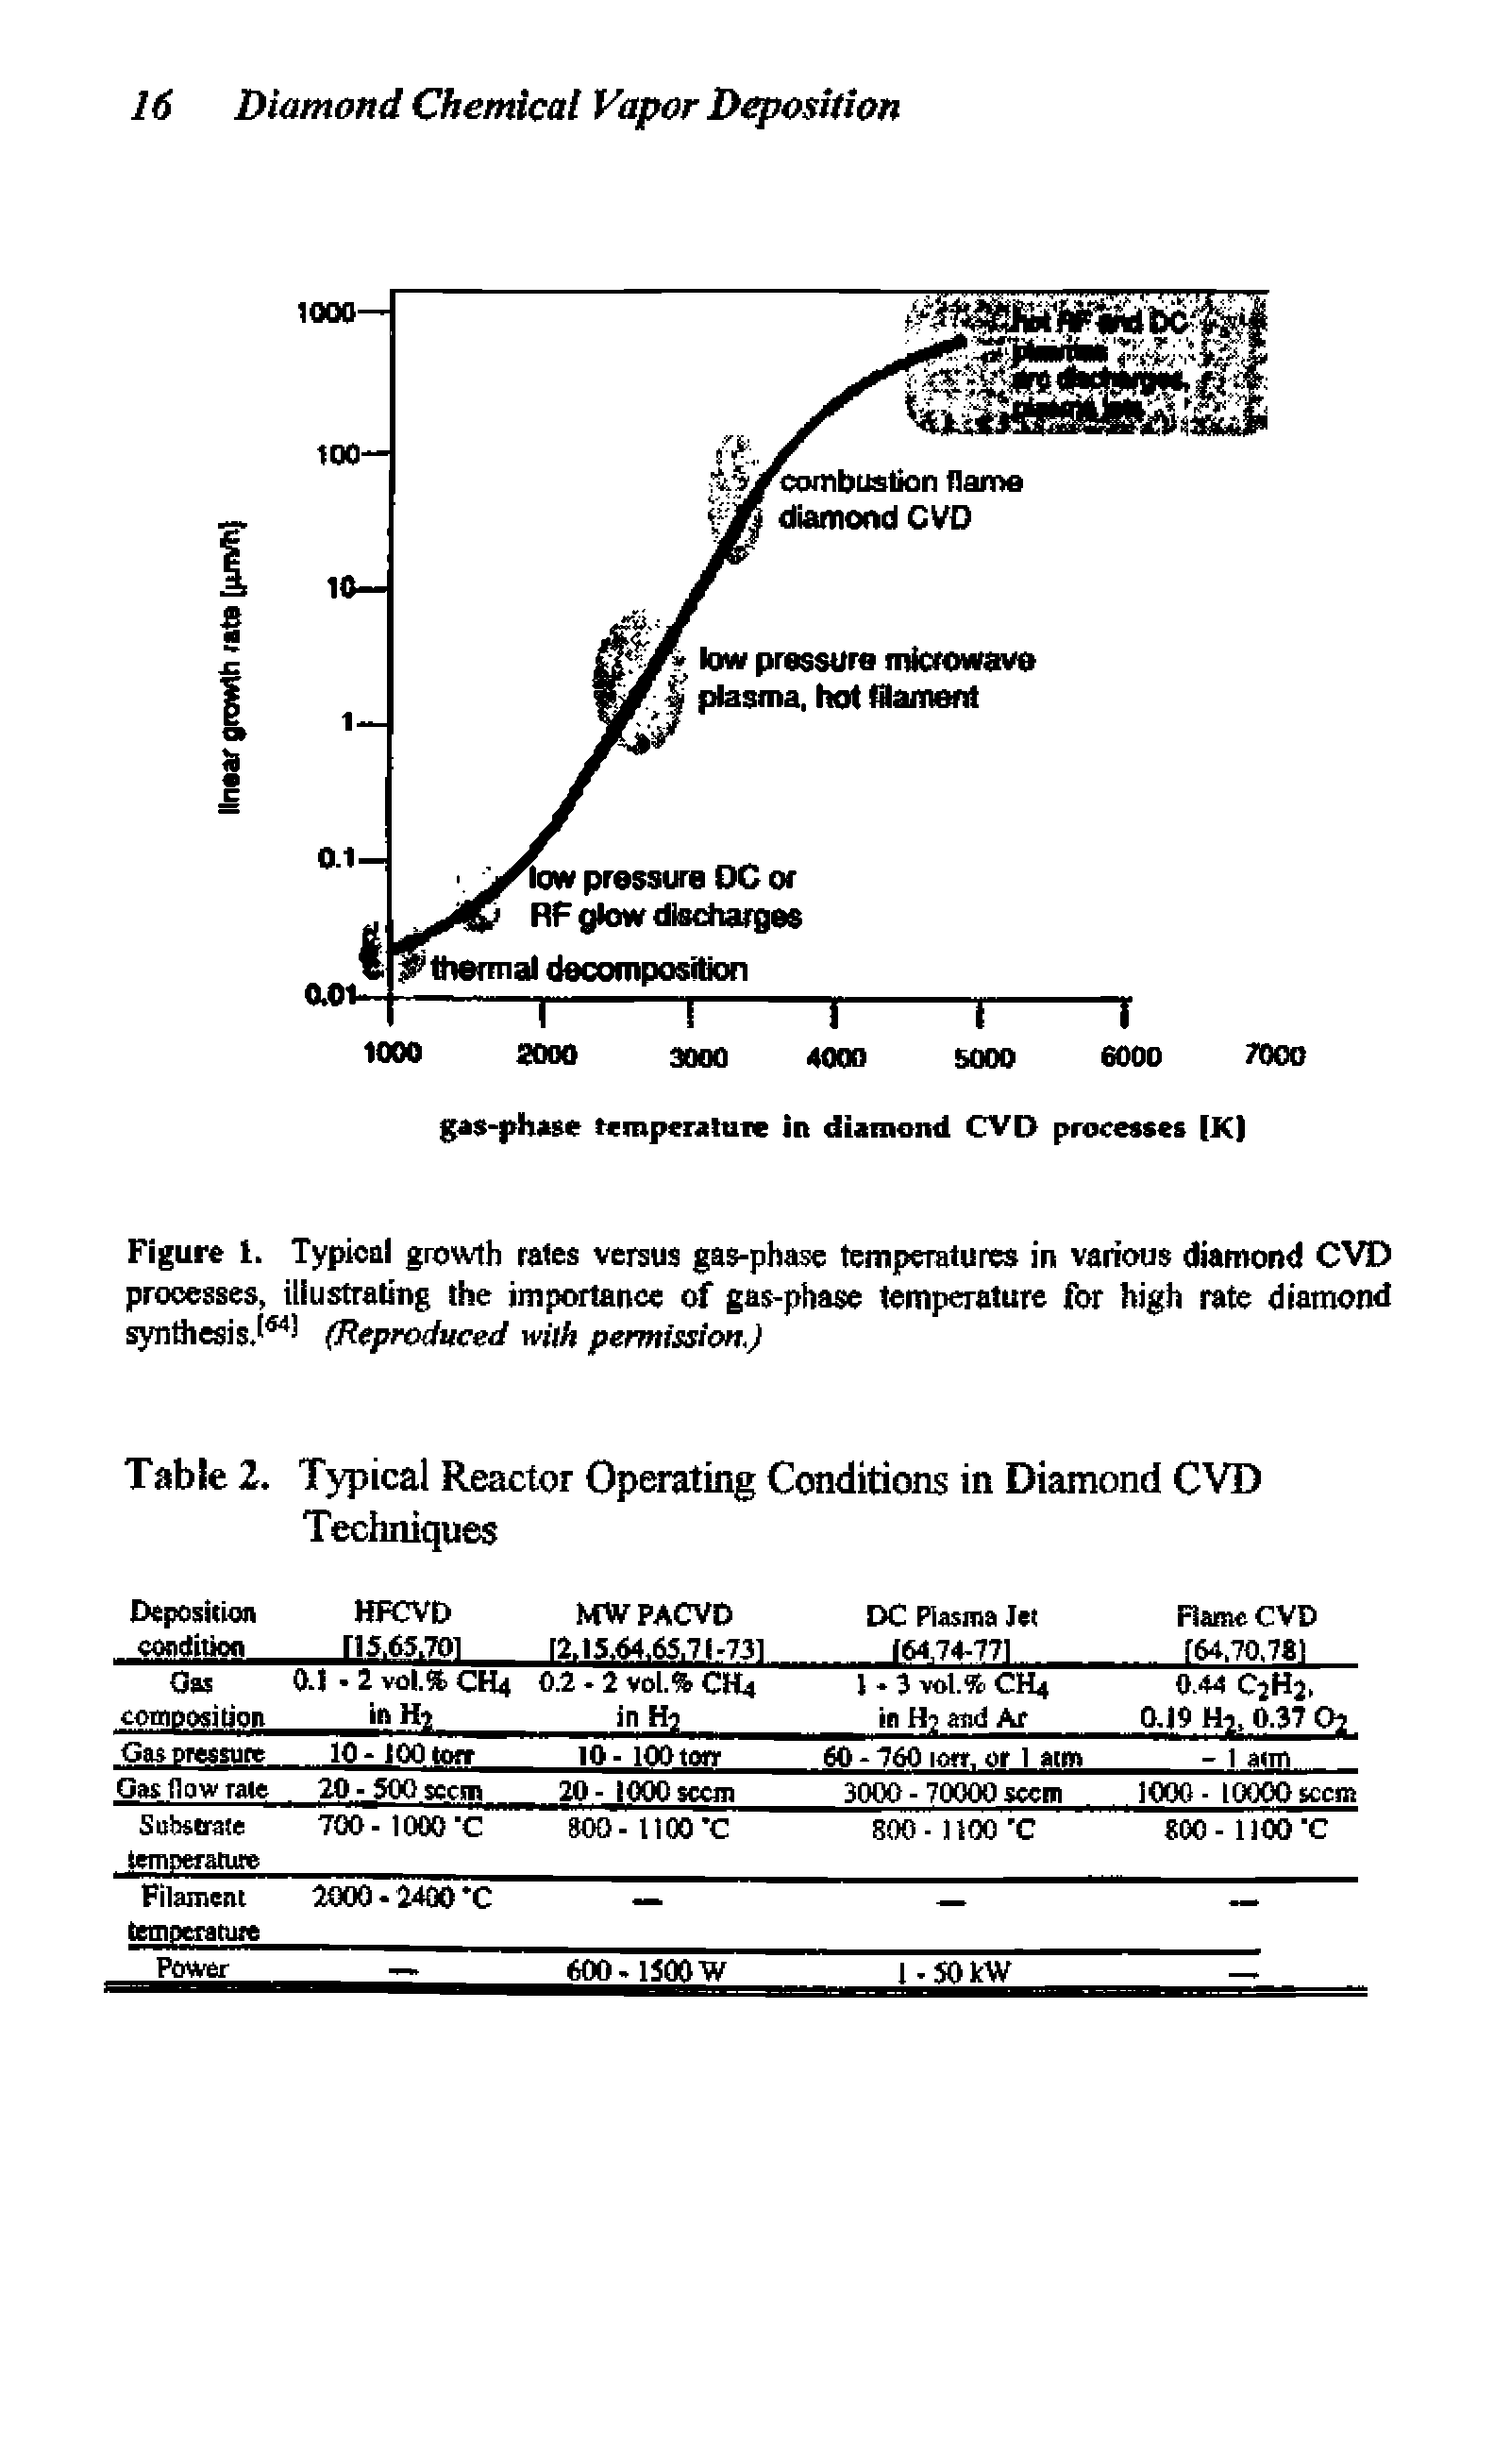 Table 2. Typical Reactor Operating Conditions in Diamond CVD Techniques...